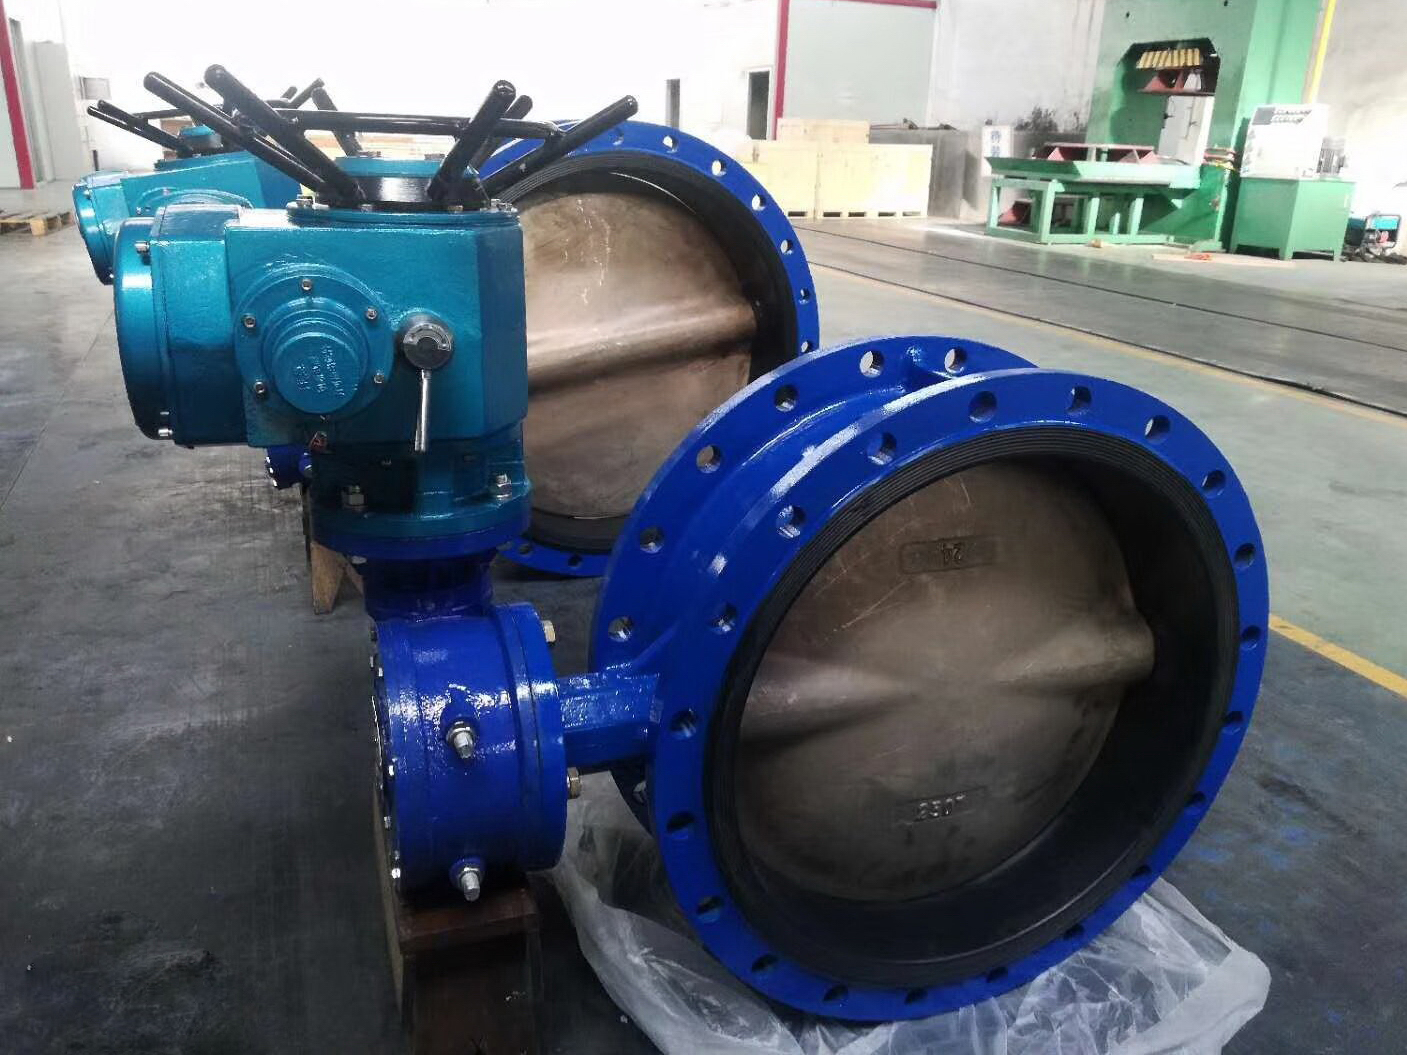 Troubleshooting of Chinese Double Half Axis Non Selling Butterfly Valves: Deep Analysis and Practical Experience Sharing